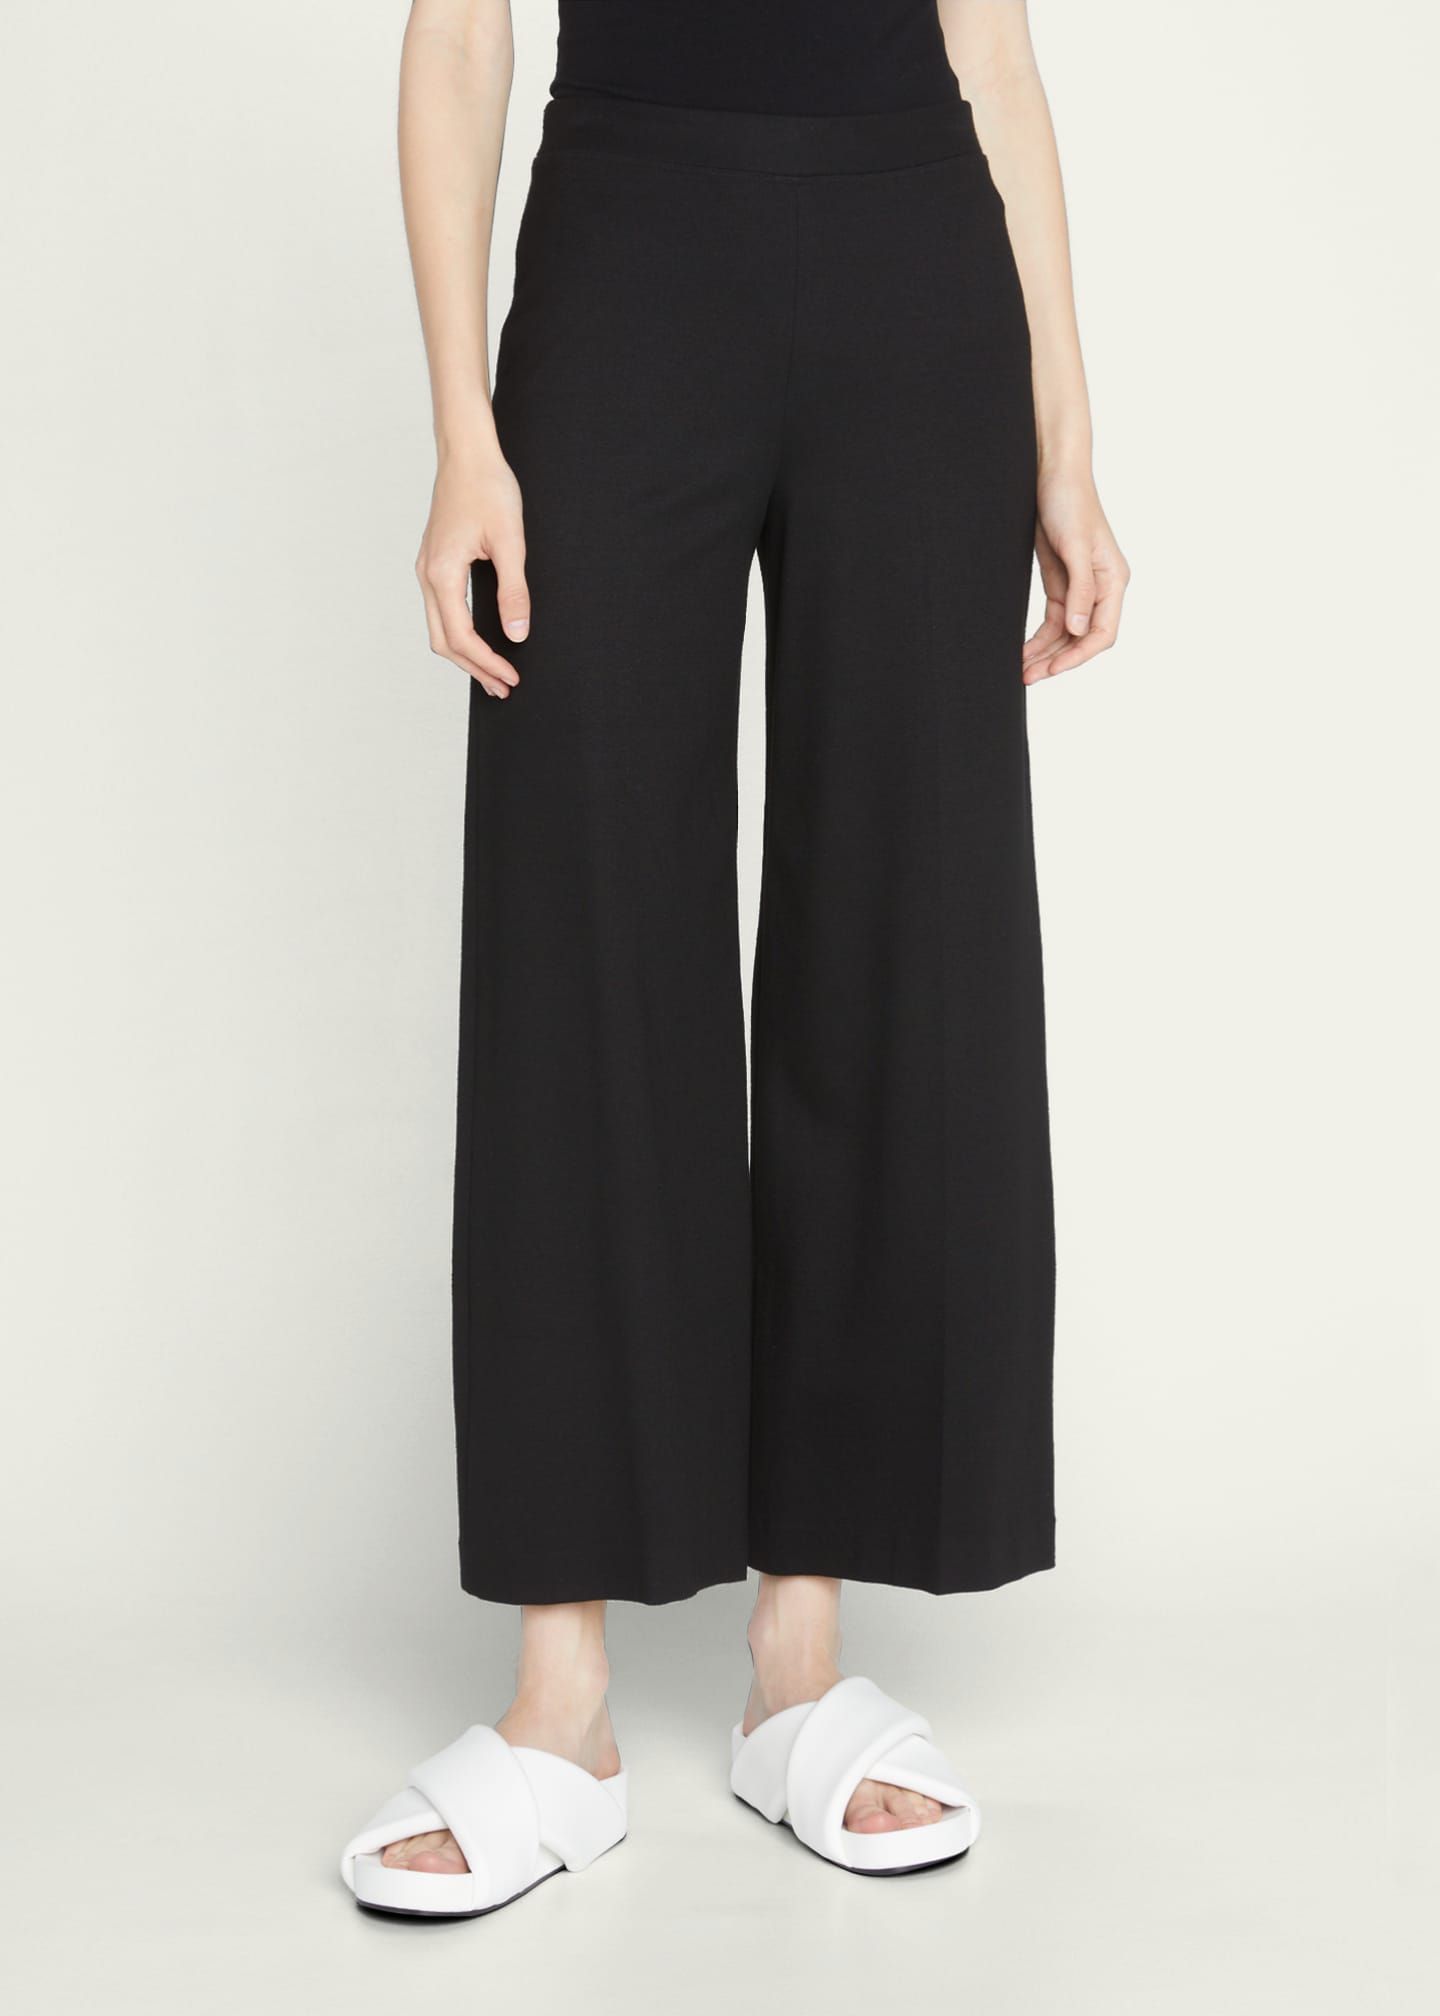 Rosetta Getty Cropped Flare Trousers Image 4 of 5